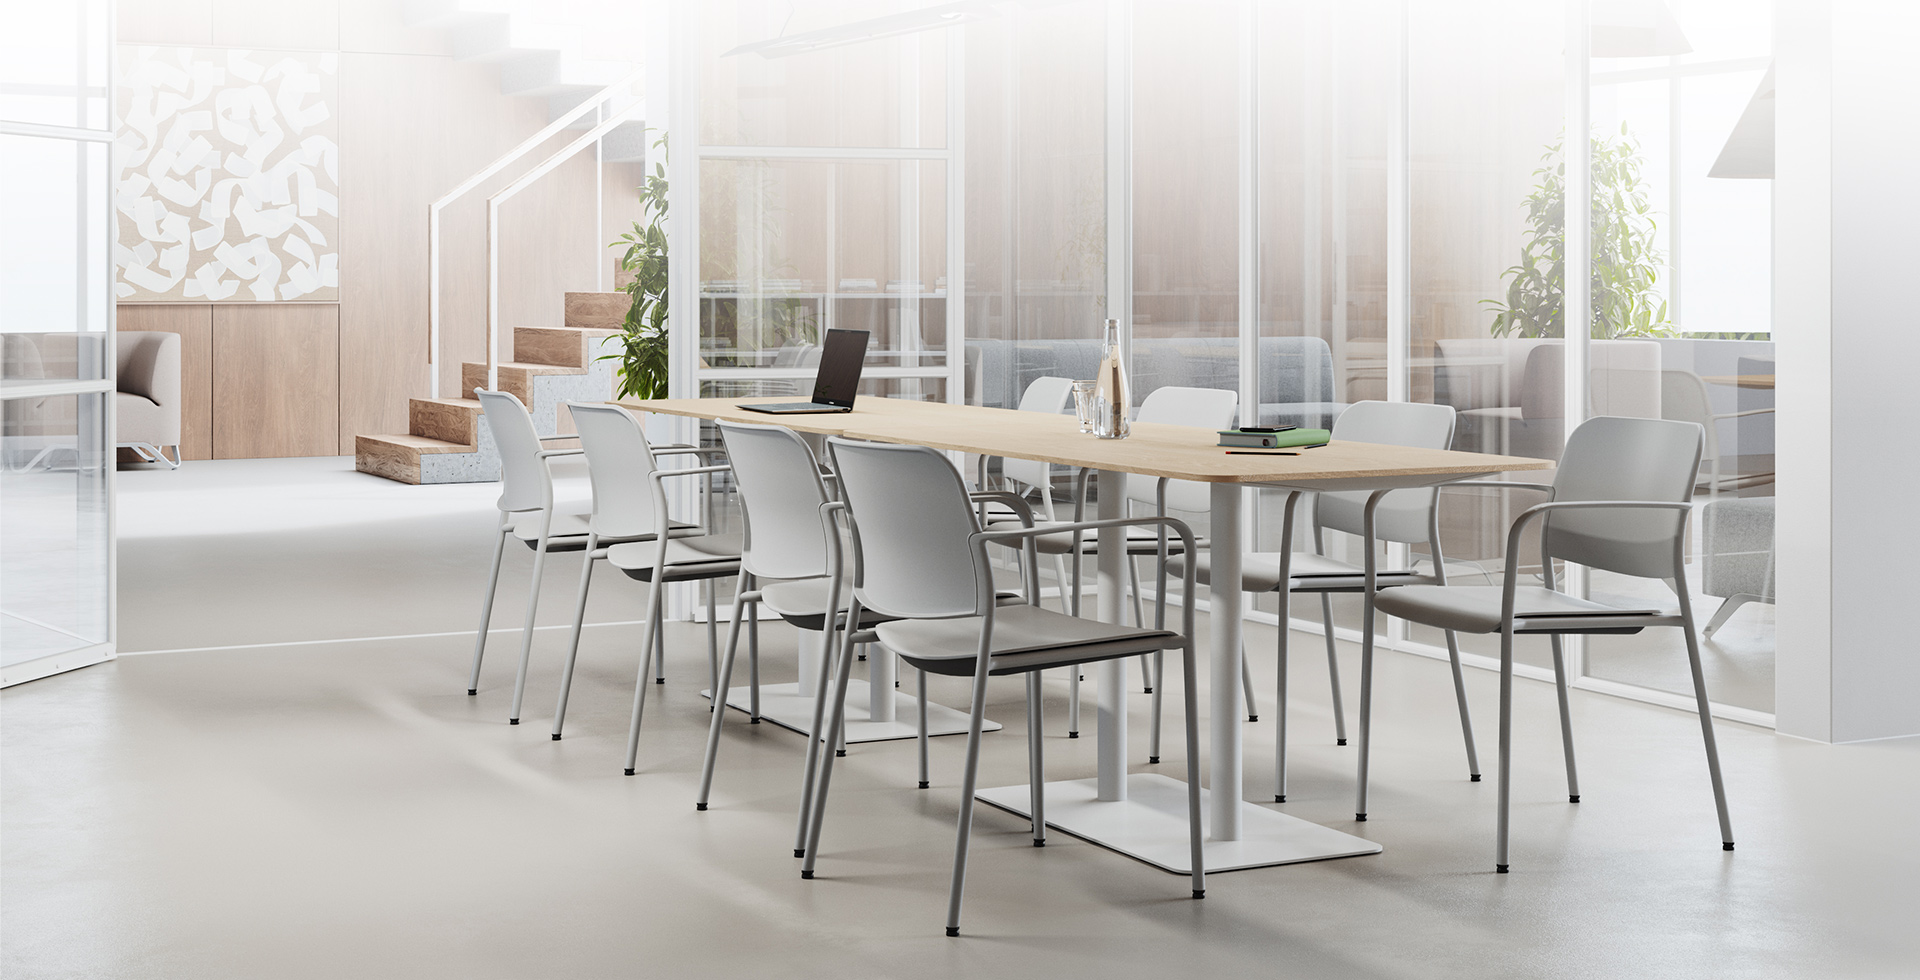 Comfortable and ergonomic office chairs with an interesting design - Profim